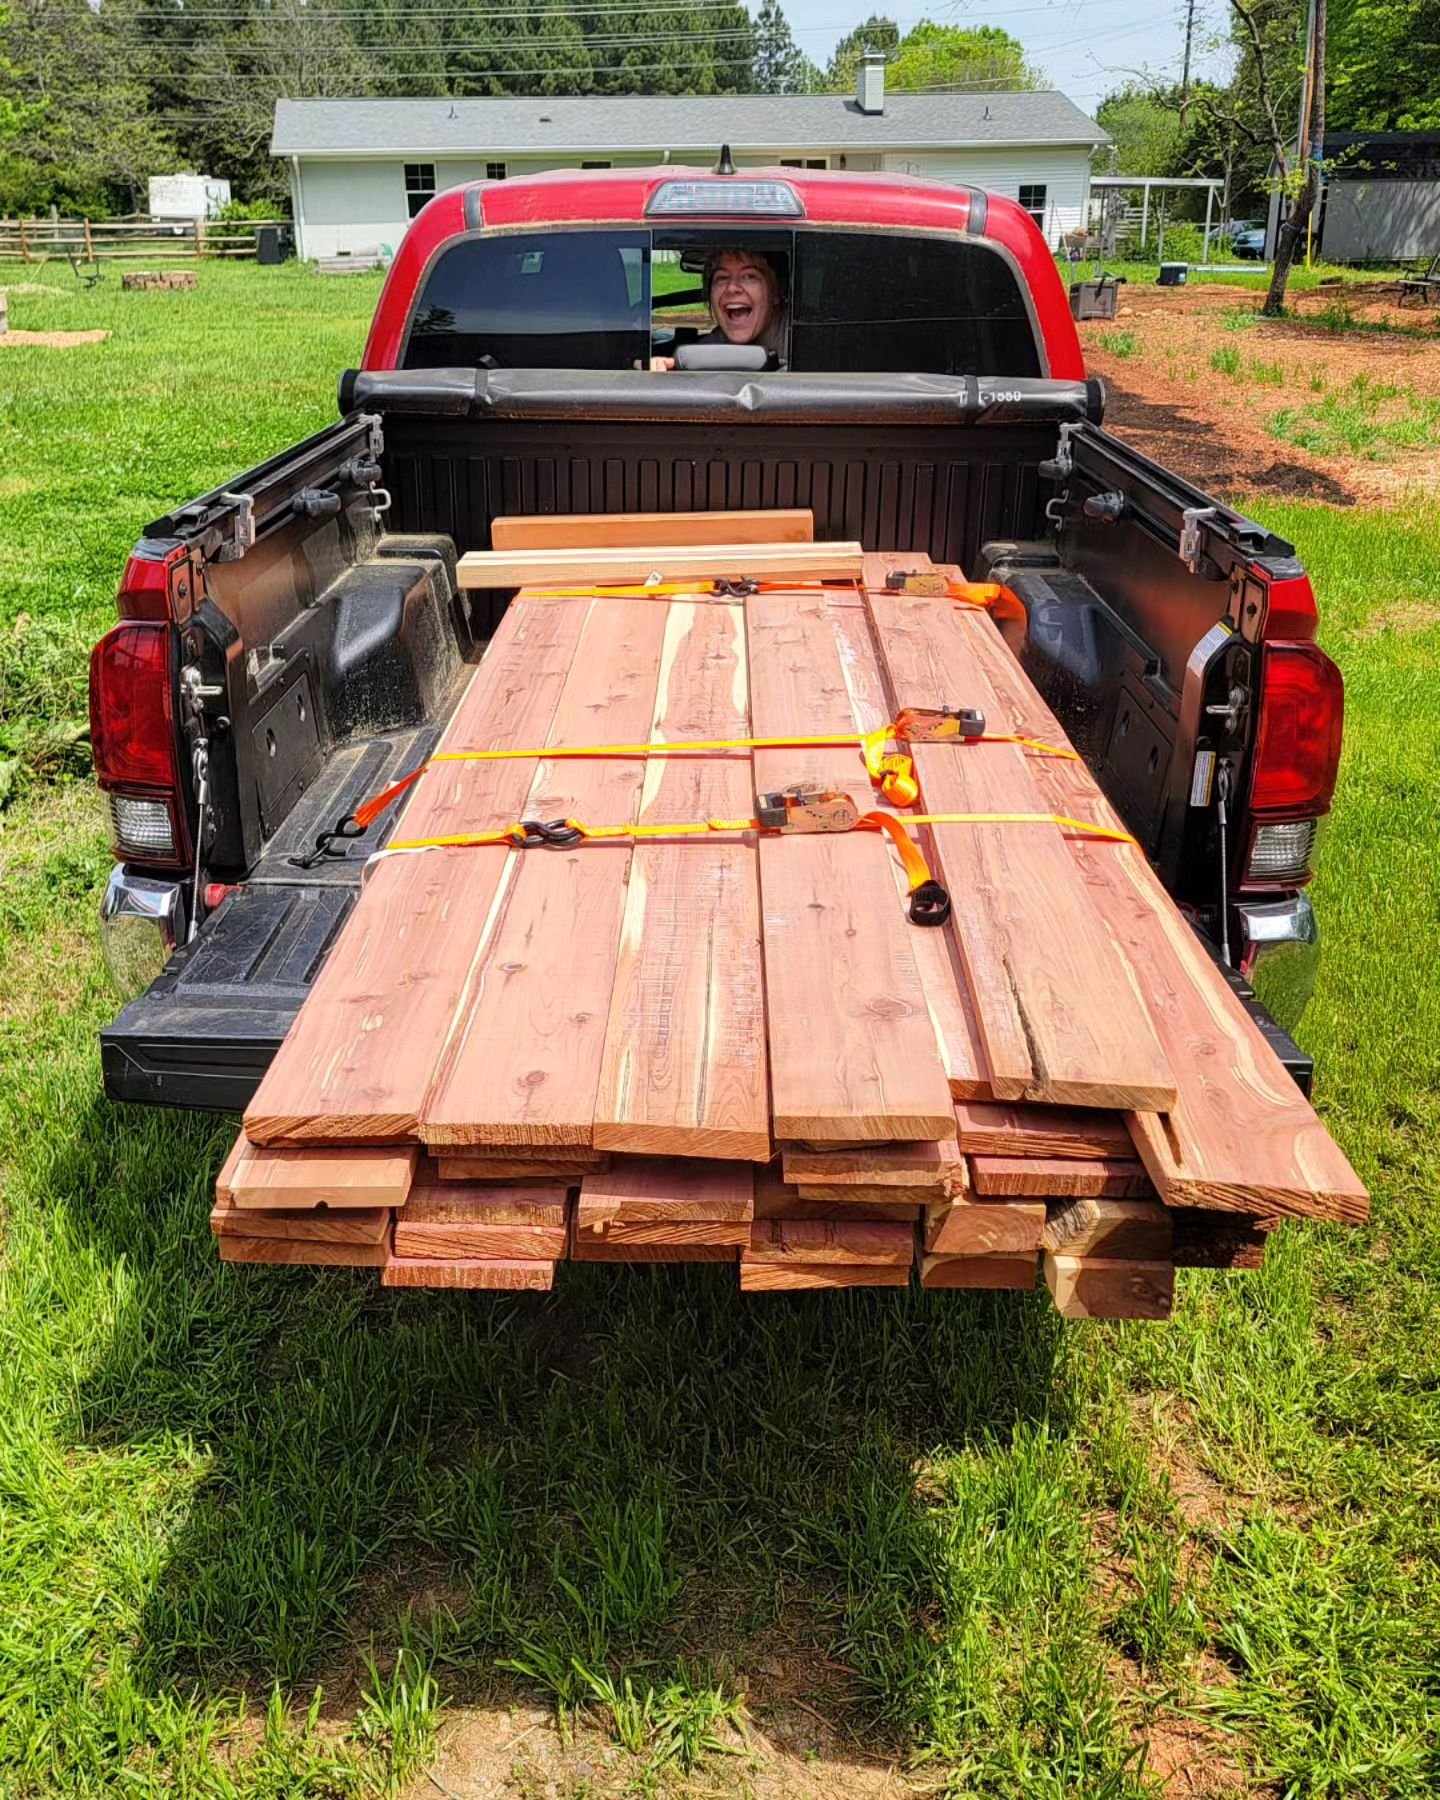 We just found a great deal on Facebook marketplace for cedar boards, so we're getting super excited about building raised beds on Saturday during our volunteer day! 

If you've been wanting to learn about using power tools, fence building, trail clea